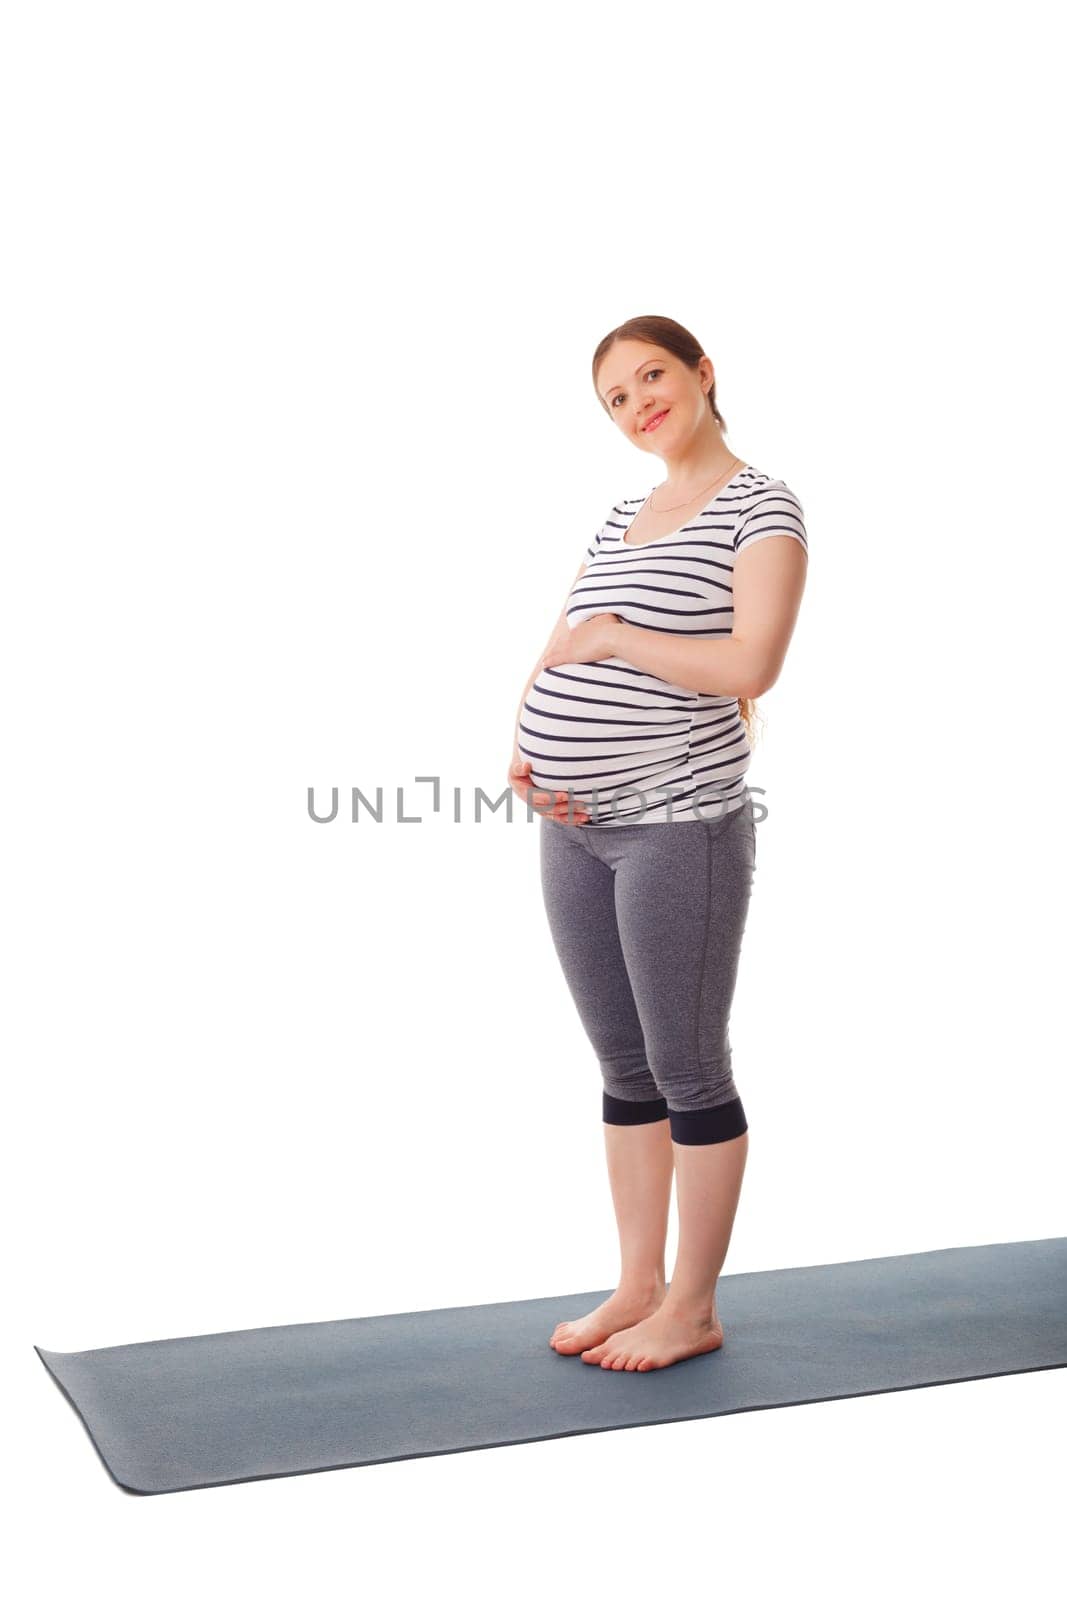 Pregnant woman standing embracing her belly by dimol